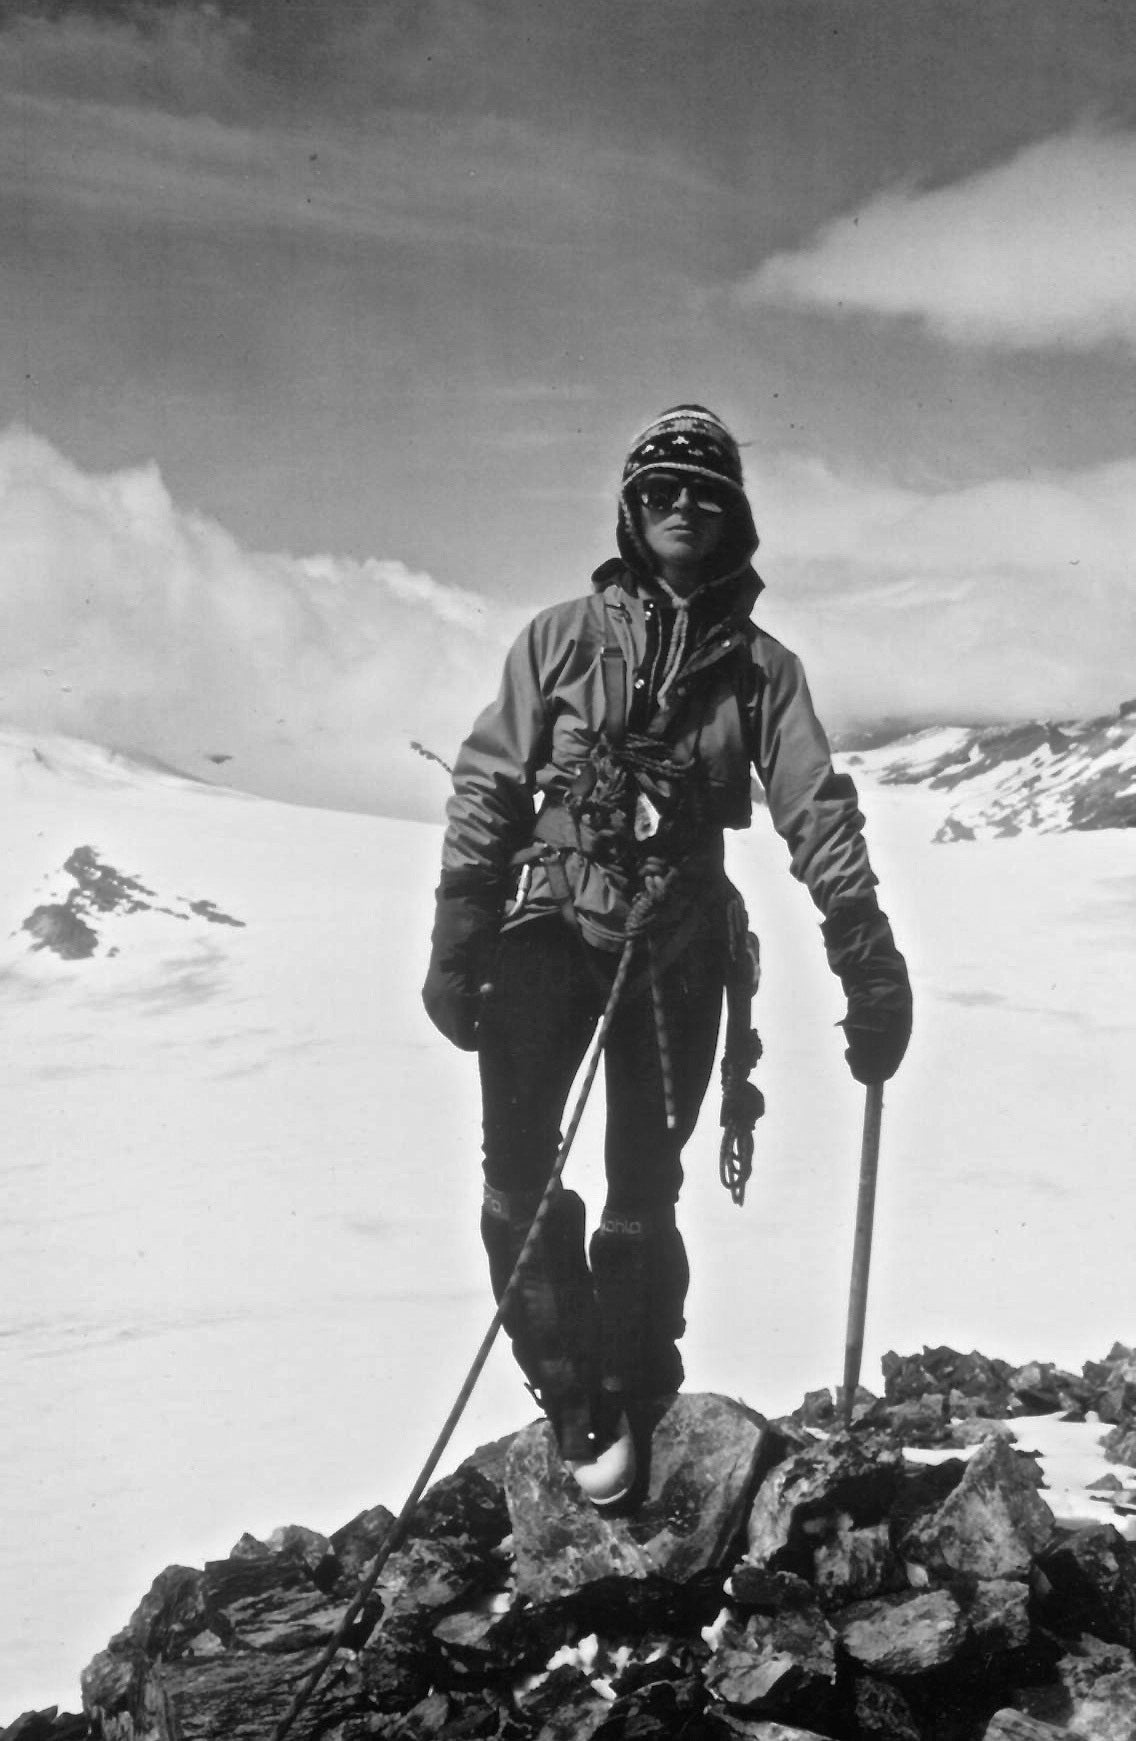 jan redford posing for a photo in snow gear on a hike on a mountain